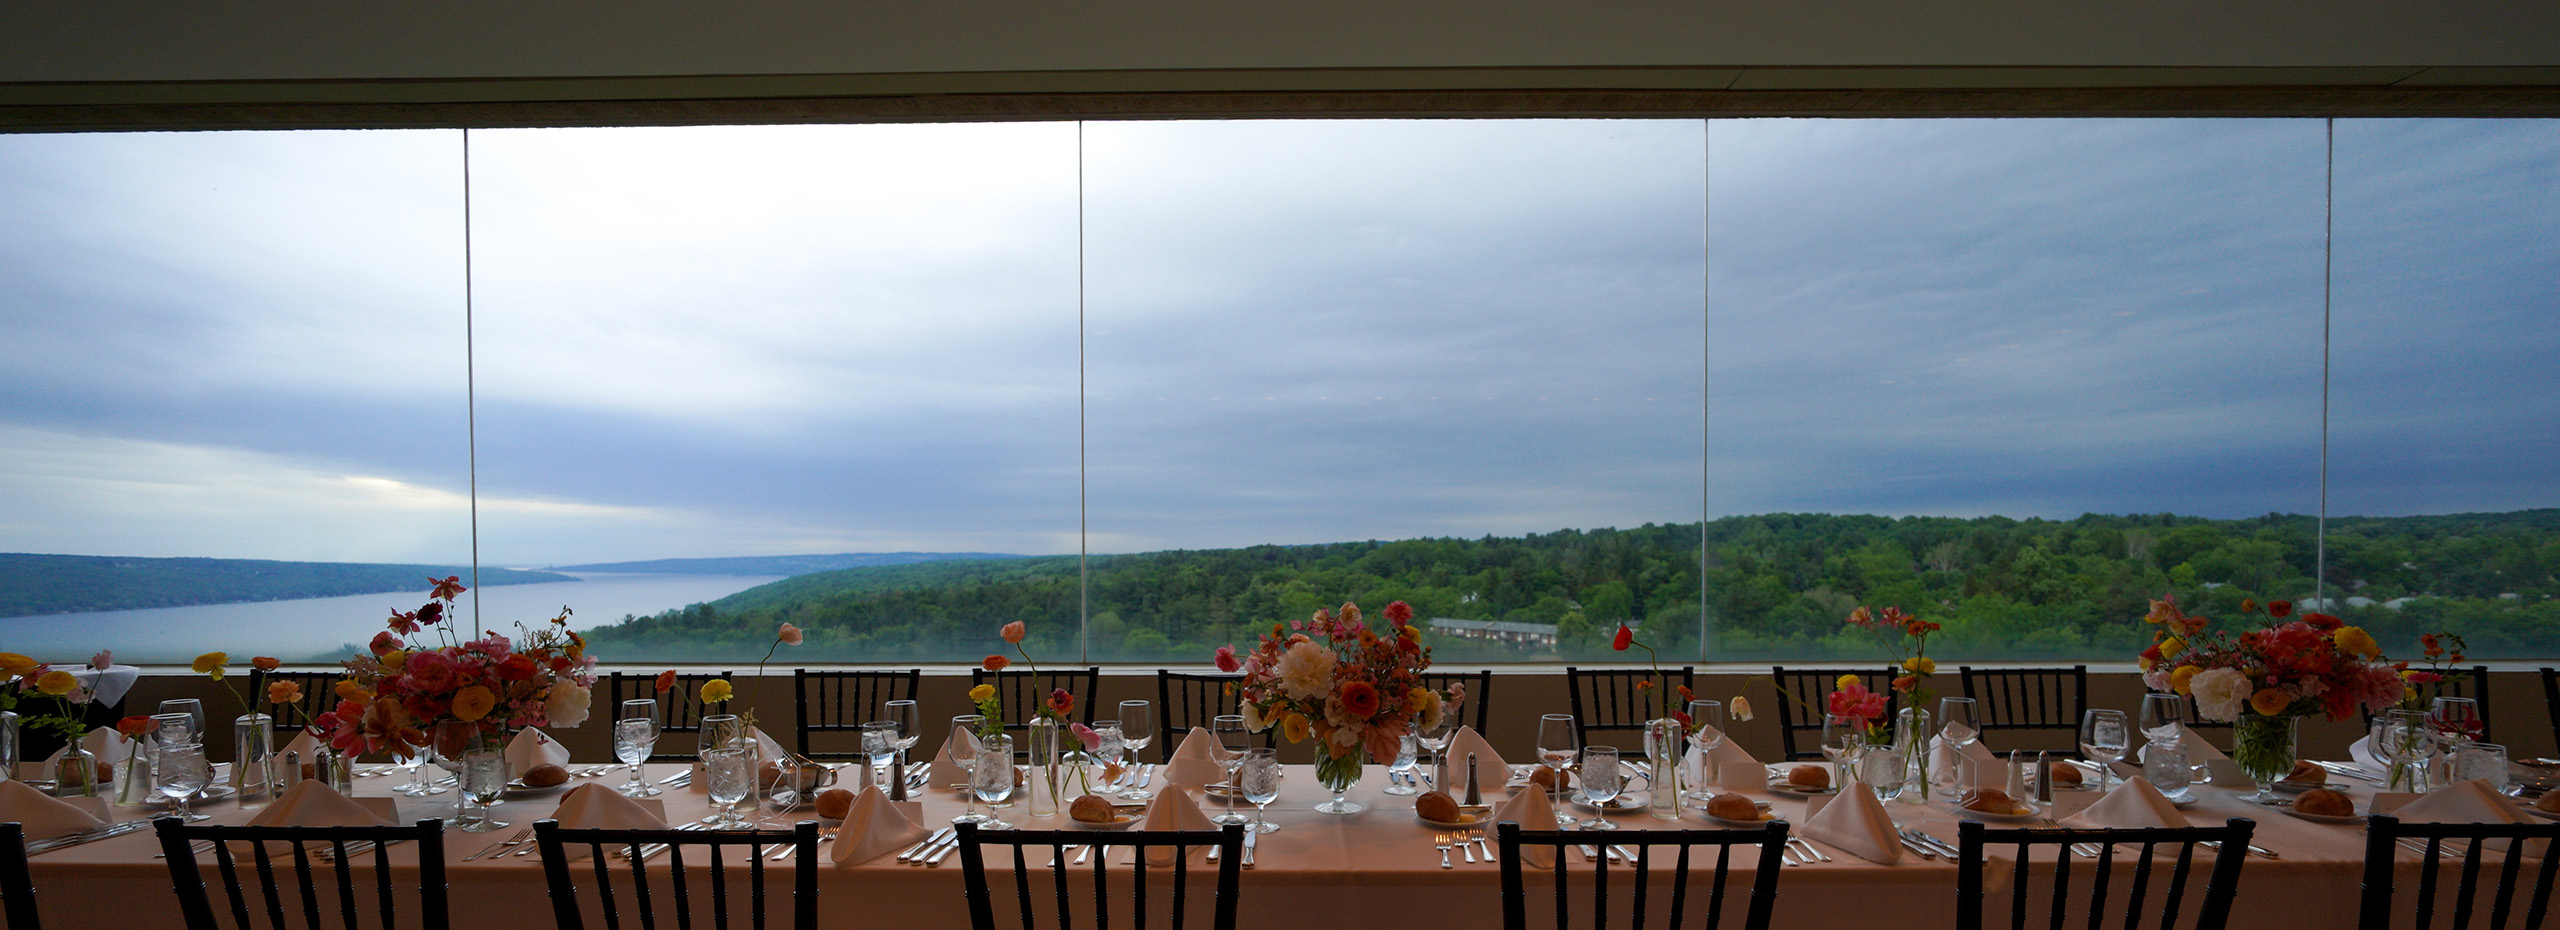 A sweeping landscape and lake from the windows of a large room set with a banquet table with flowers